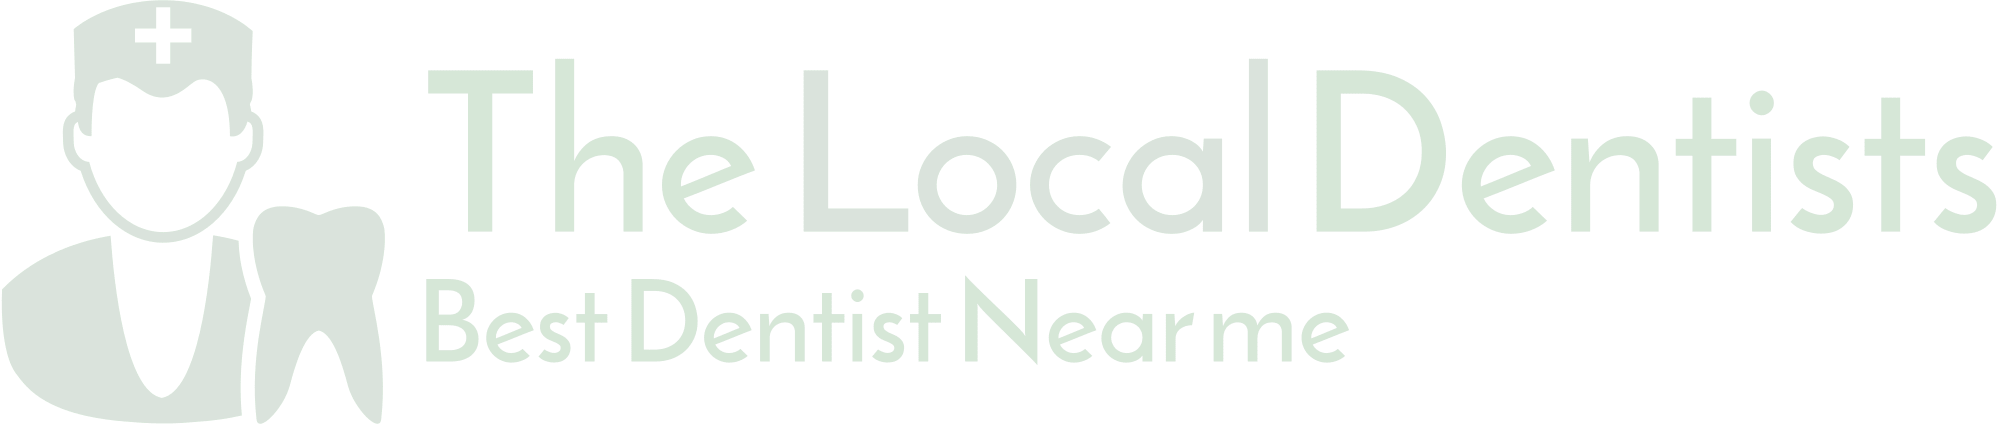 The Local Dentists